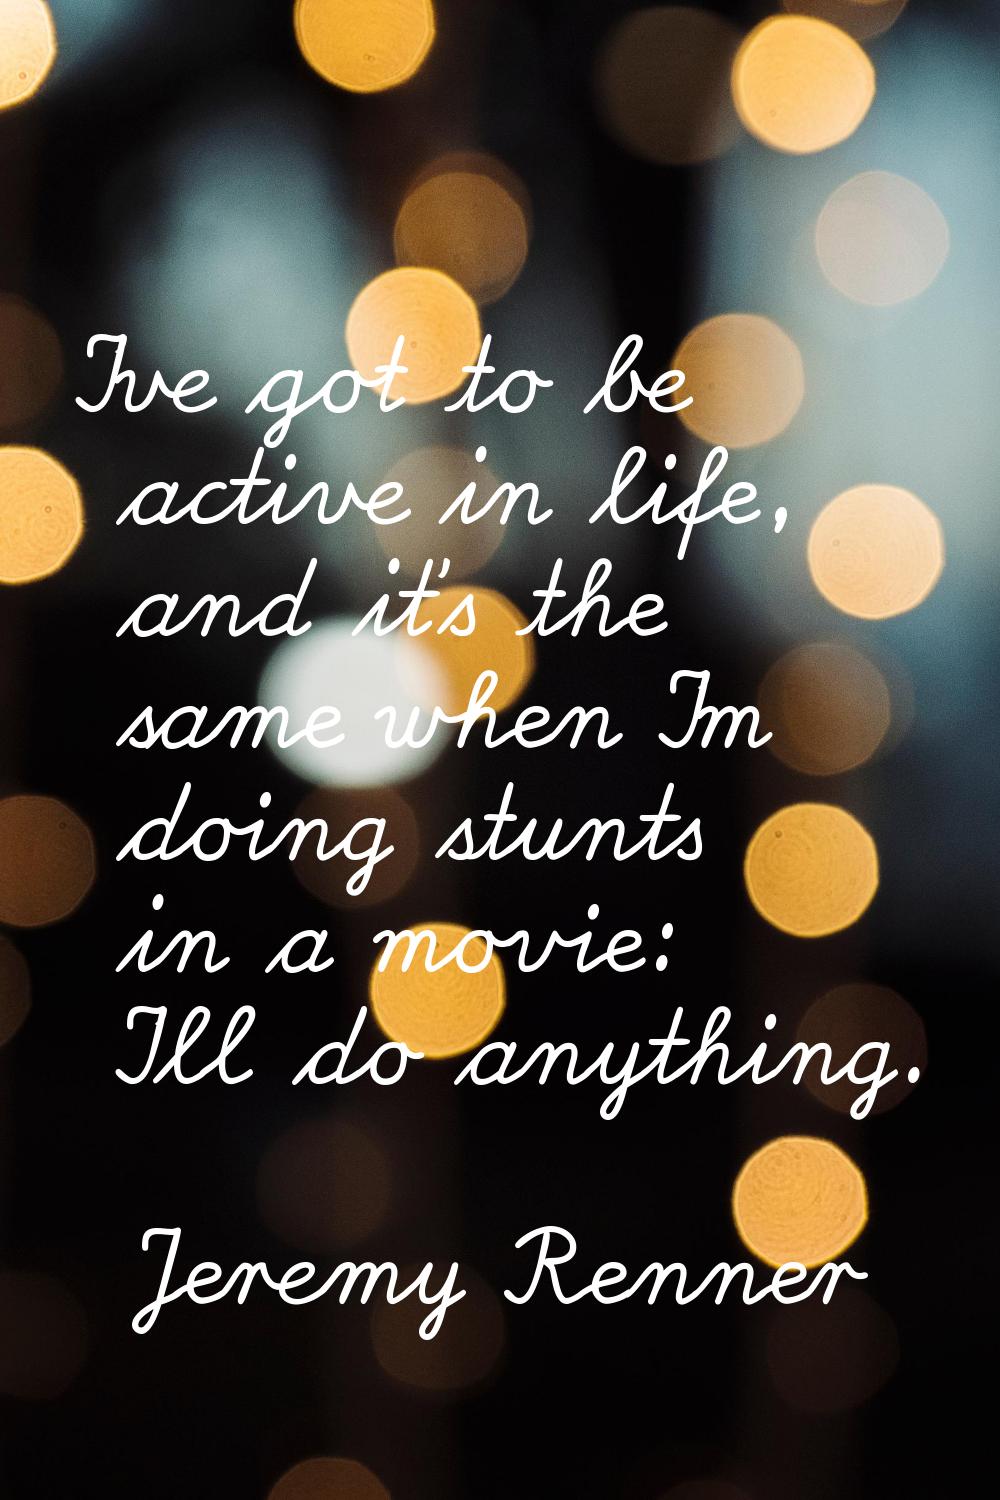 I've got to be active in life, and it's the same when I'm doing stunts in a movie: I'll do anything